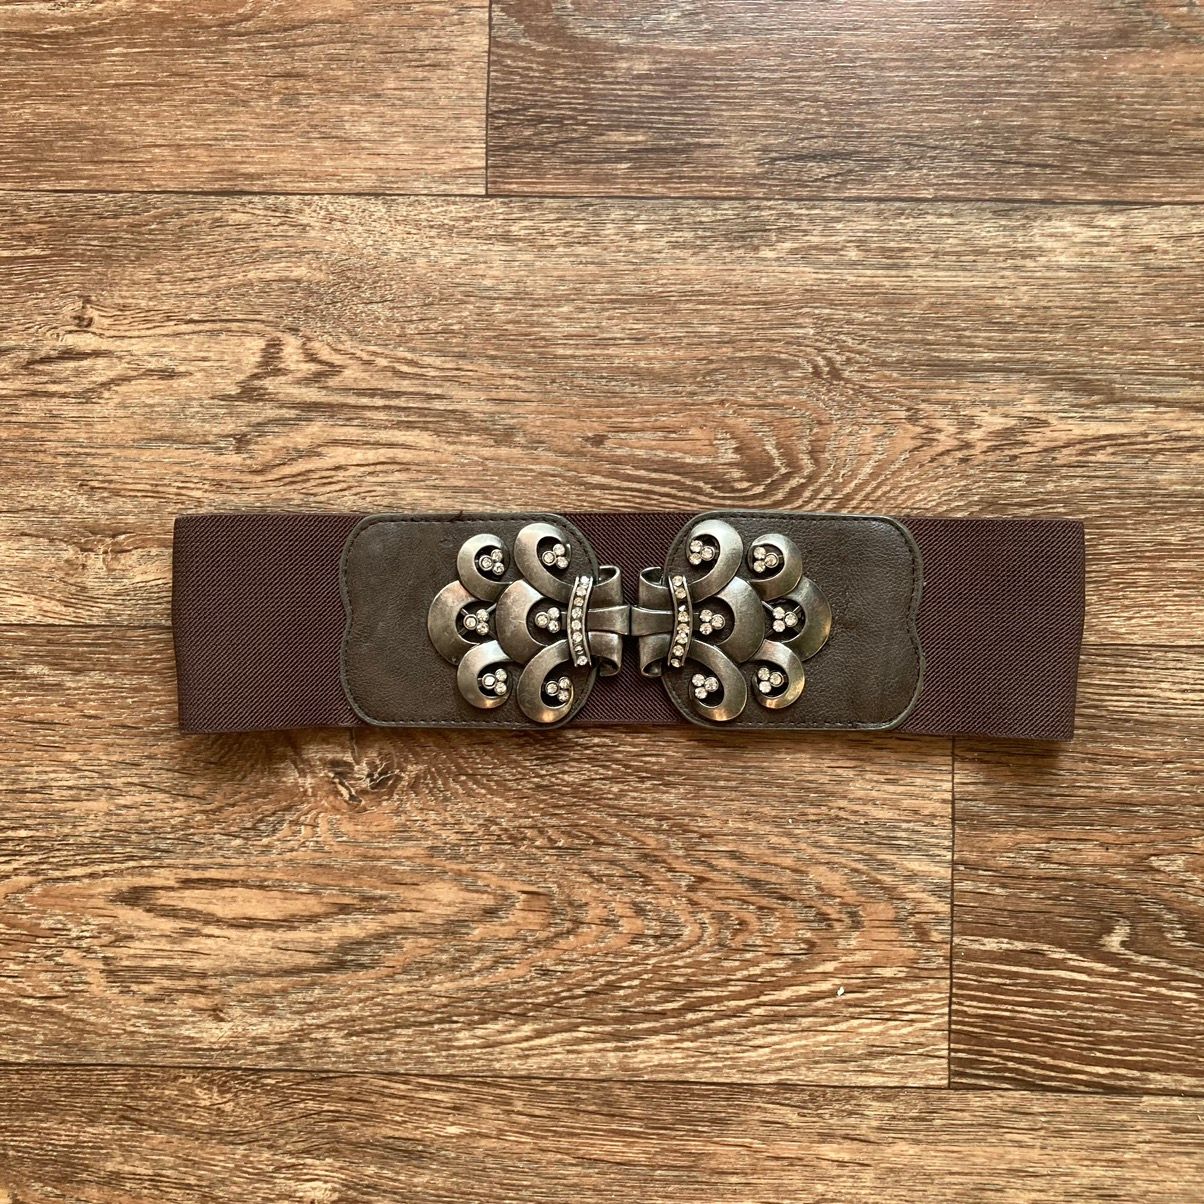 Hysteric Glamour Vintage Adult Avant Garde Belts Chrome Hearts Style Size ONE SIZE - 1 Preview